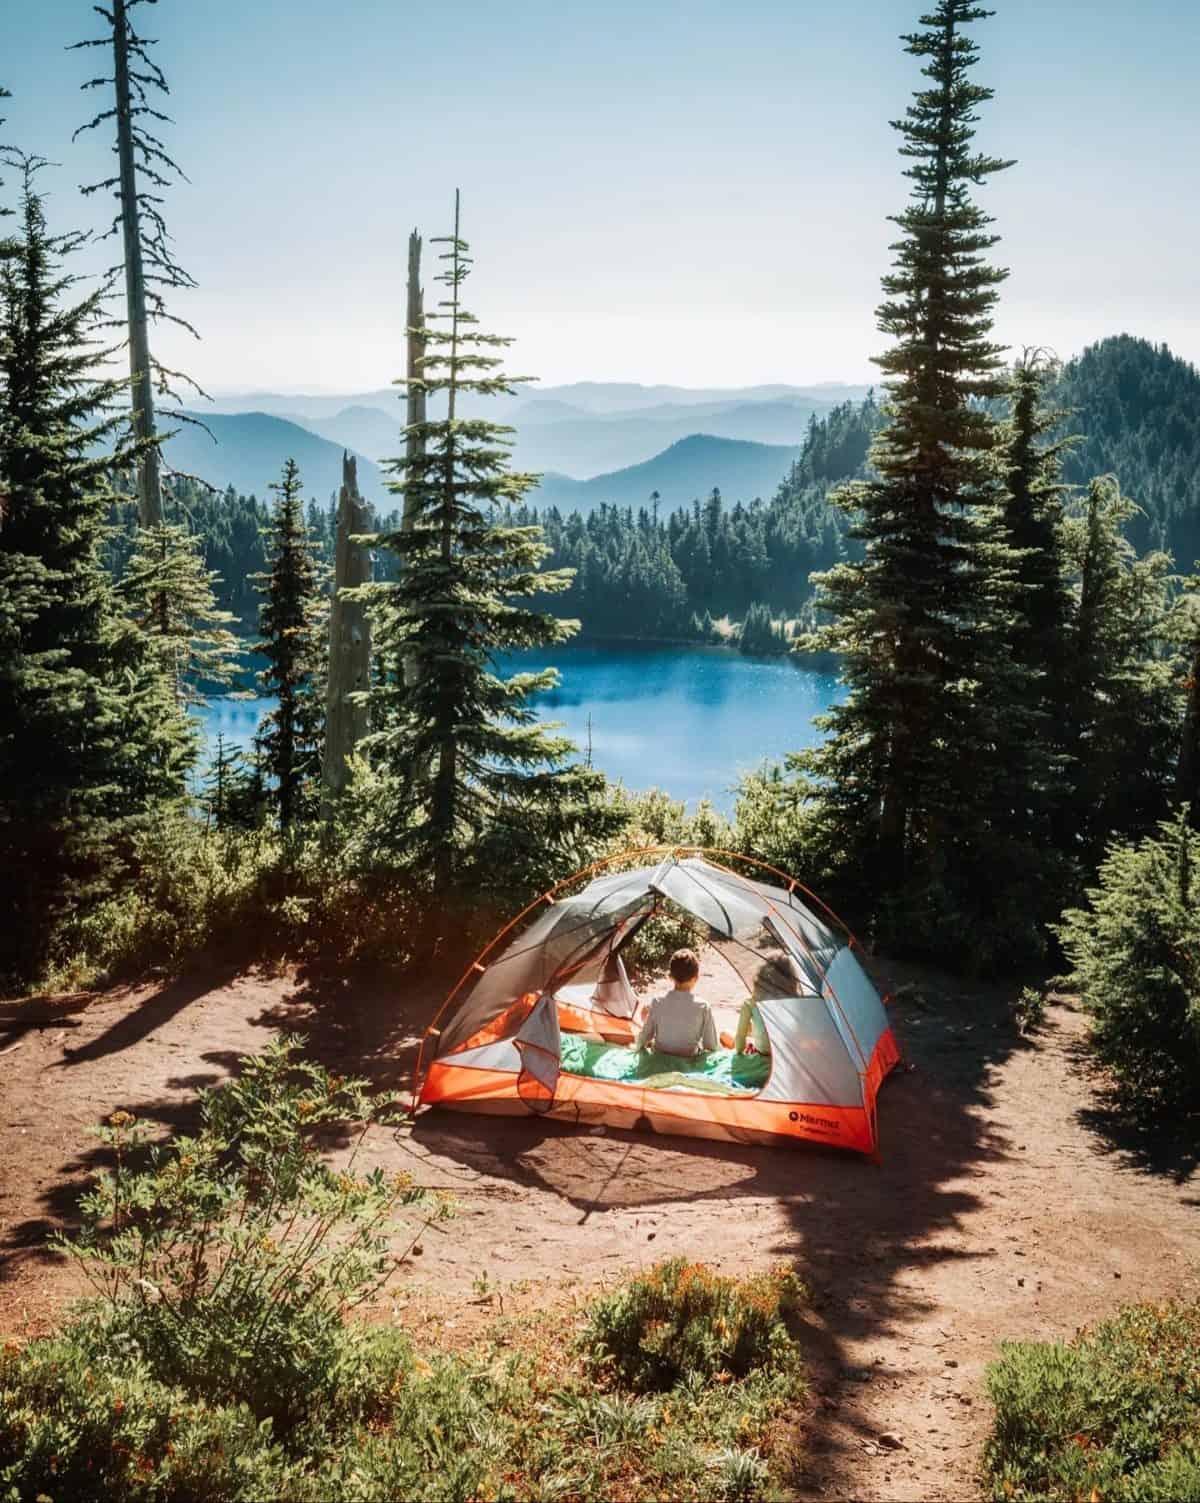 camping scene with tent among trees above a blue lake